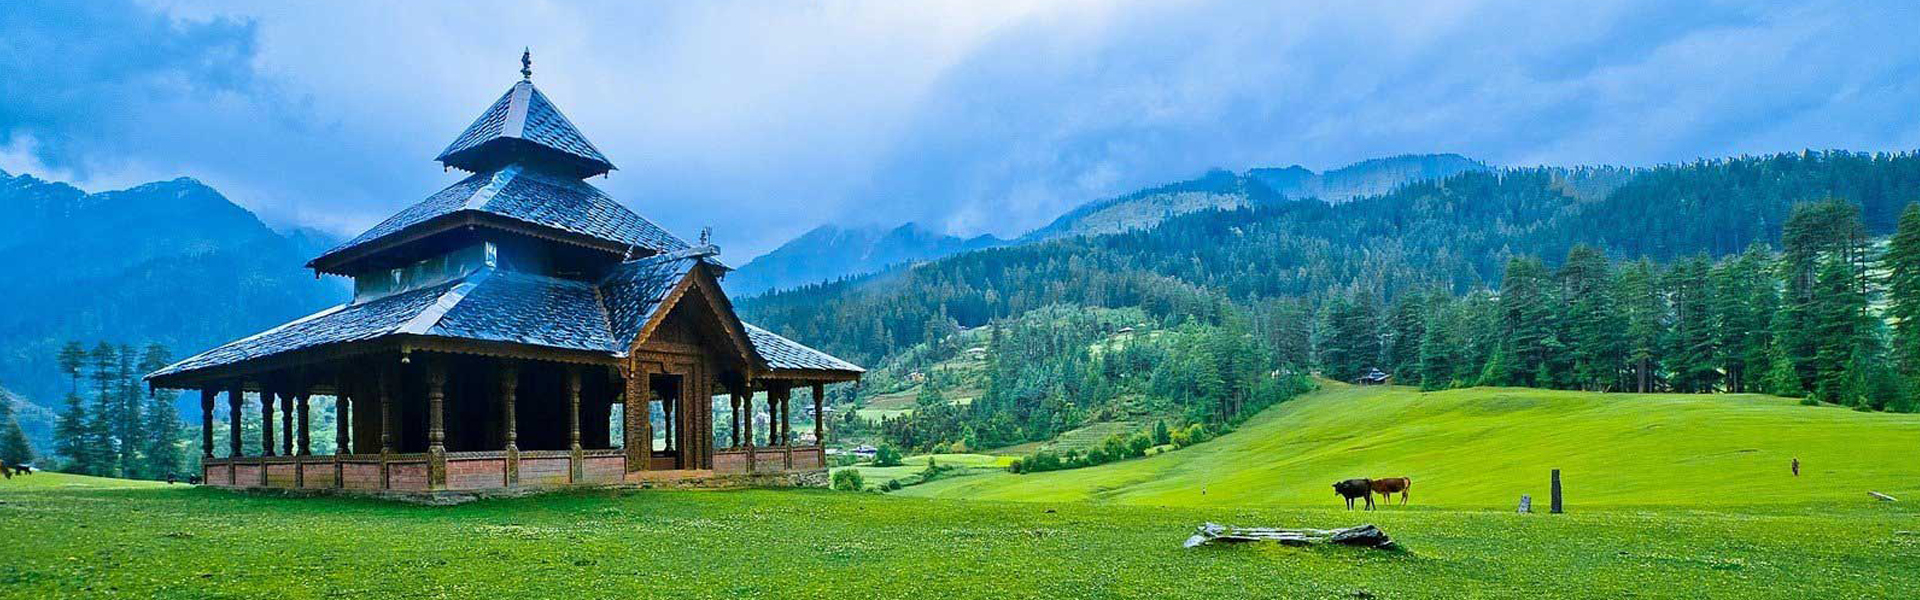 Simla Manali Tour Package from Delhi